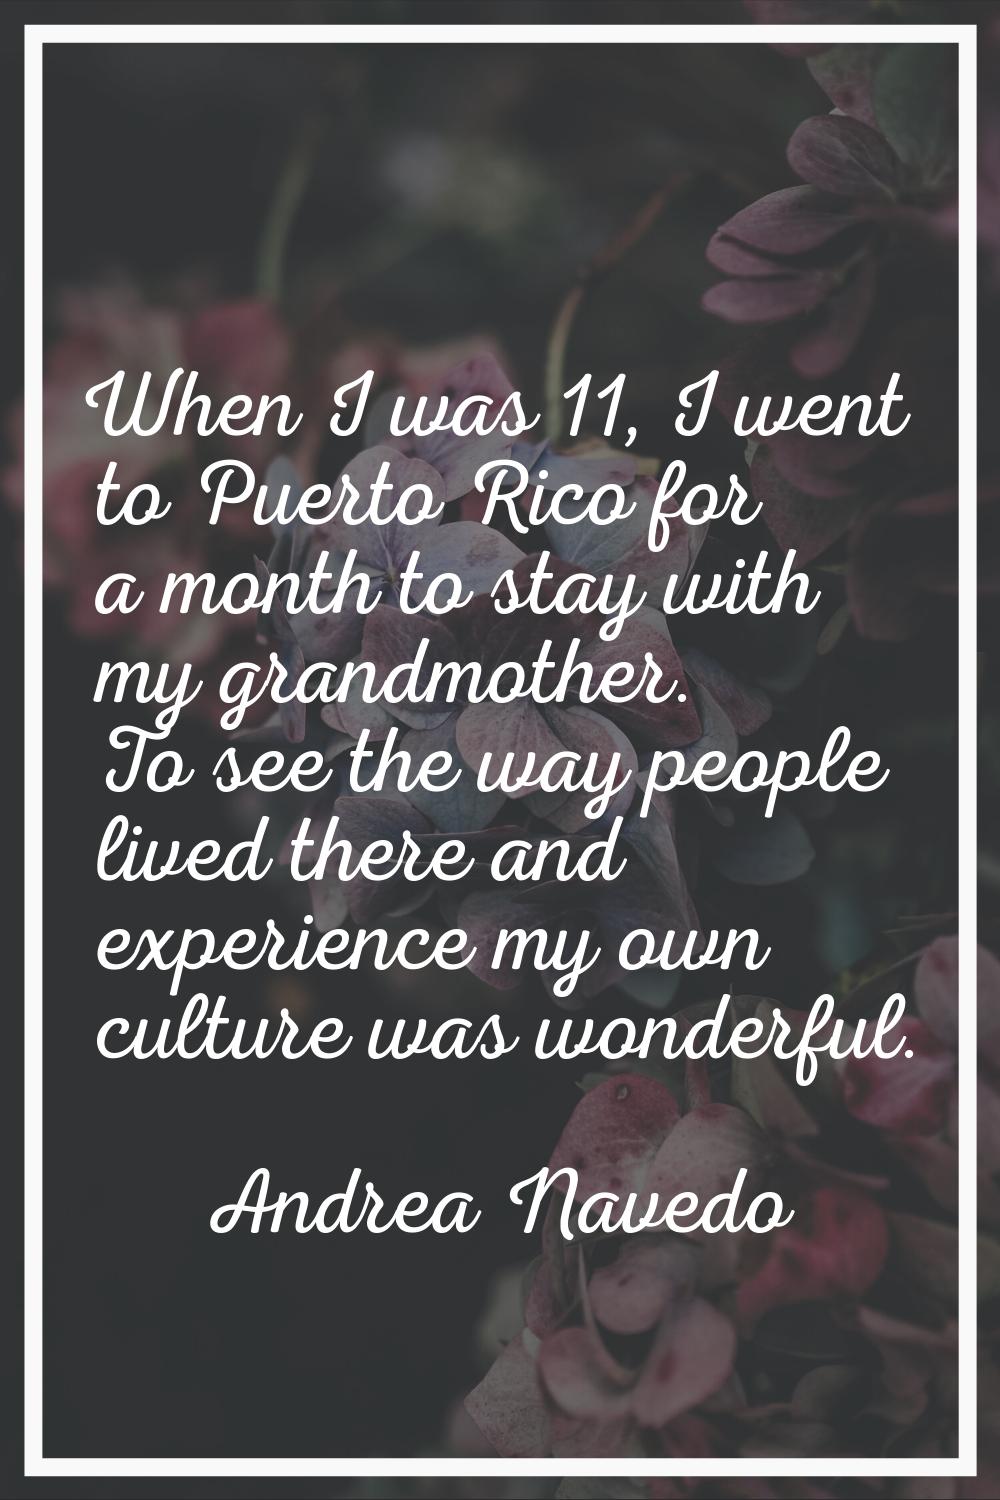 When I was 11, I went to Puerto Rico for a month to stay with my grandmother. To see the way people